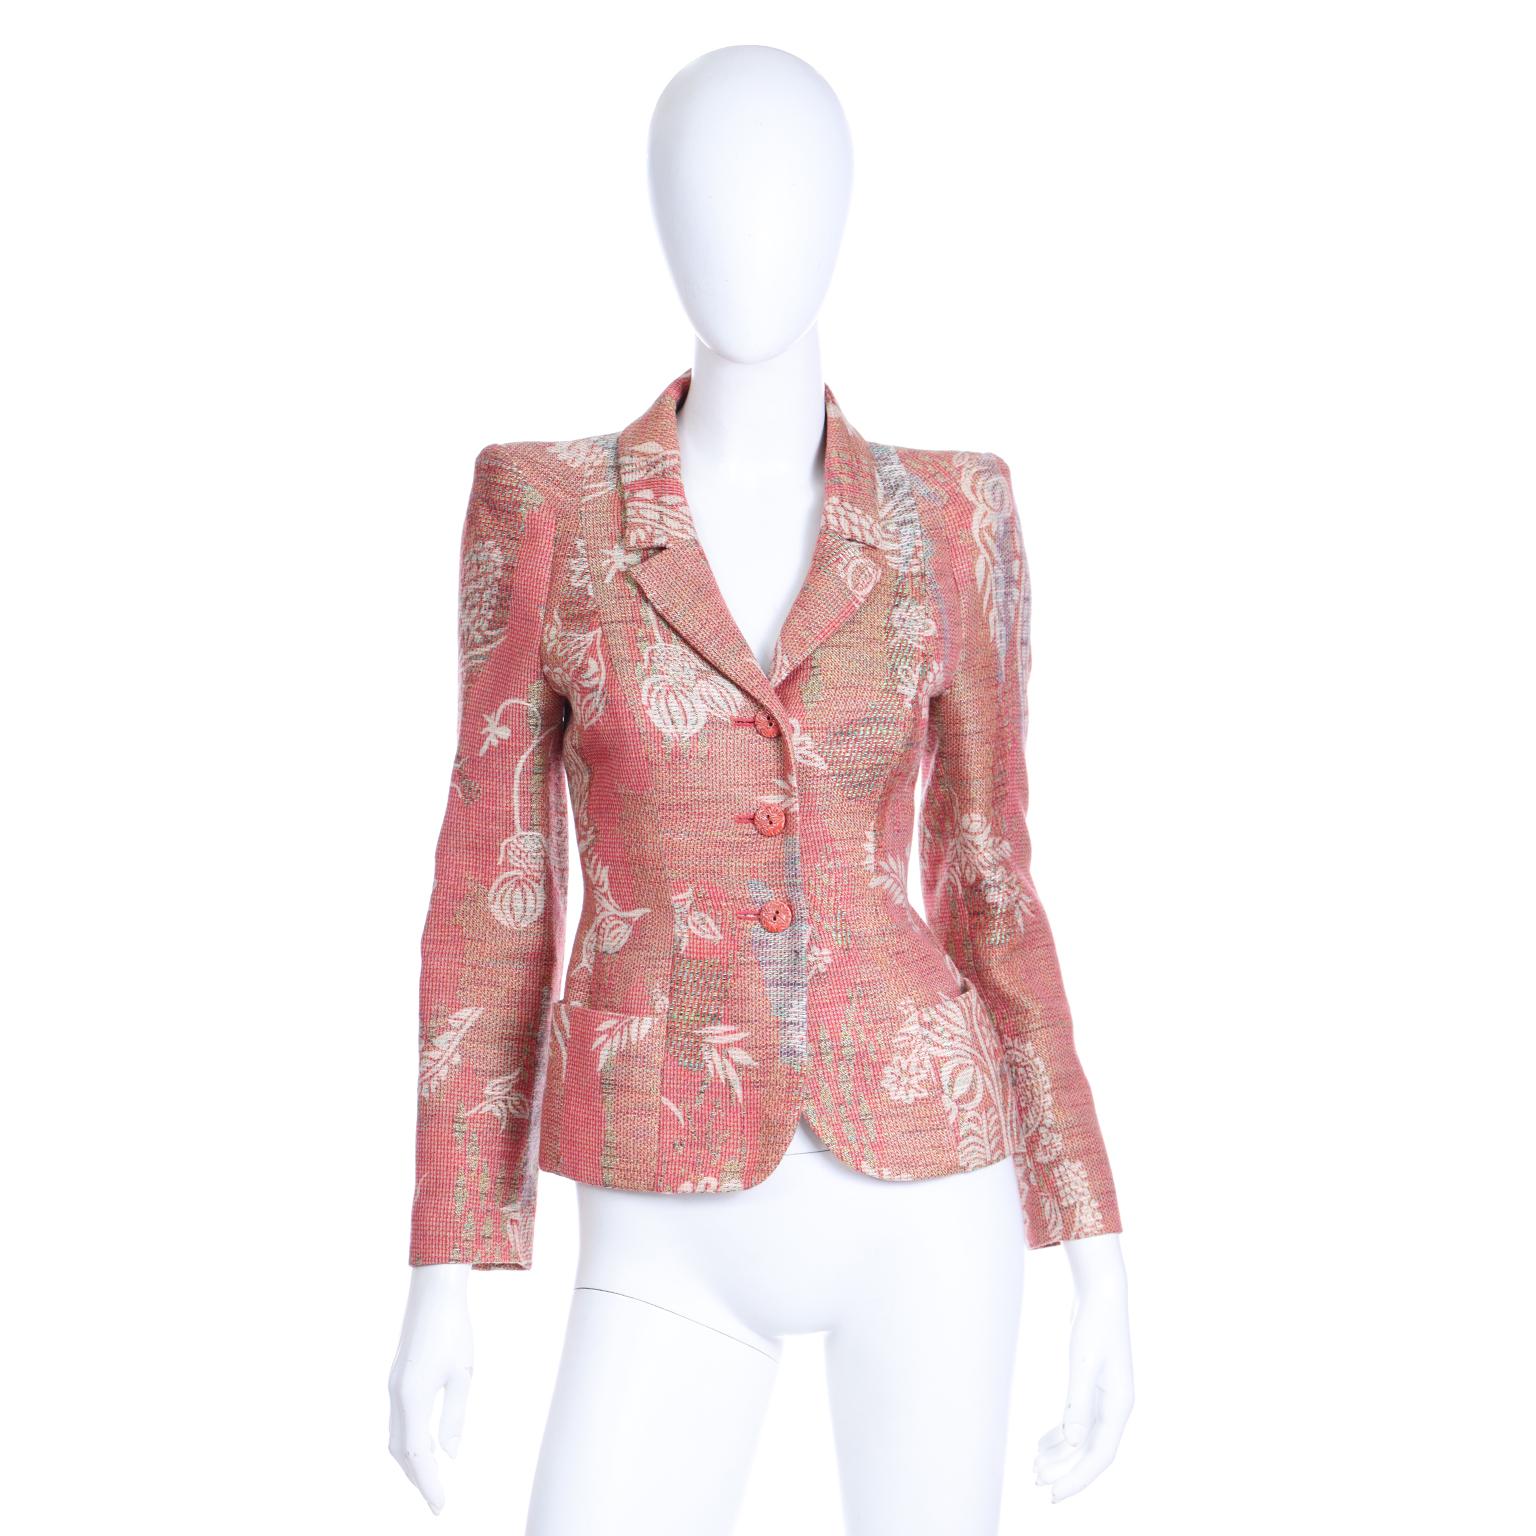 This gorgeous vintage Christian Lacroix jacquard blazer is in lovely shades of rose, green, blue and white. We love the fit of this jacket and the modern structure of the shoulders. There are two front pockets and three front buttons for closure.